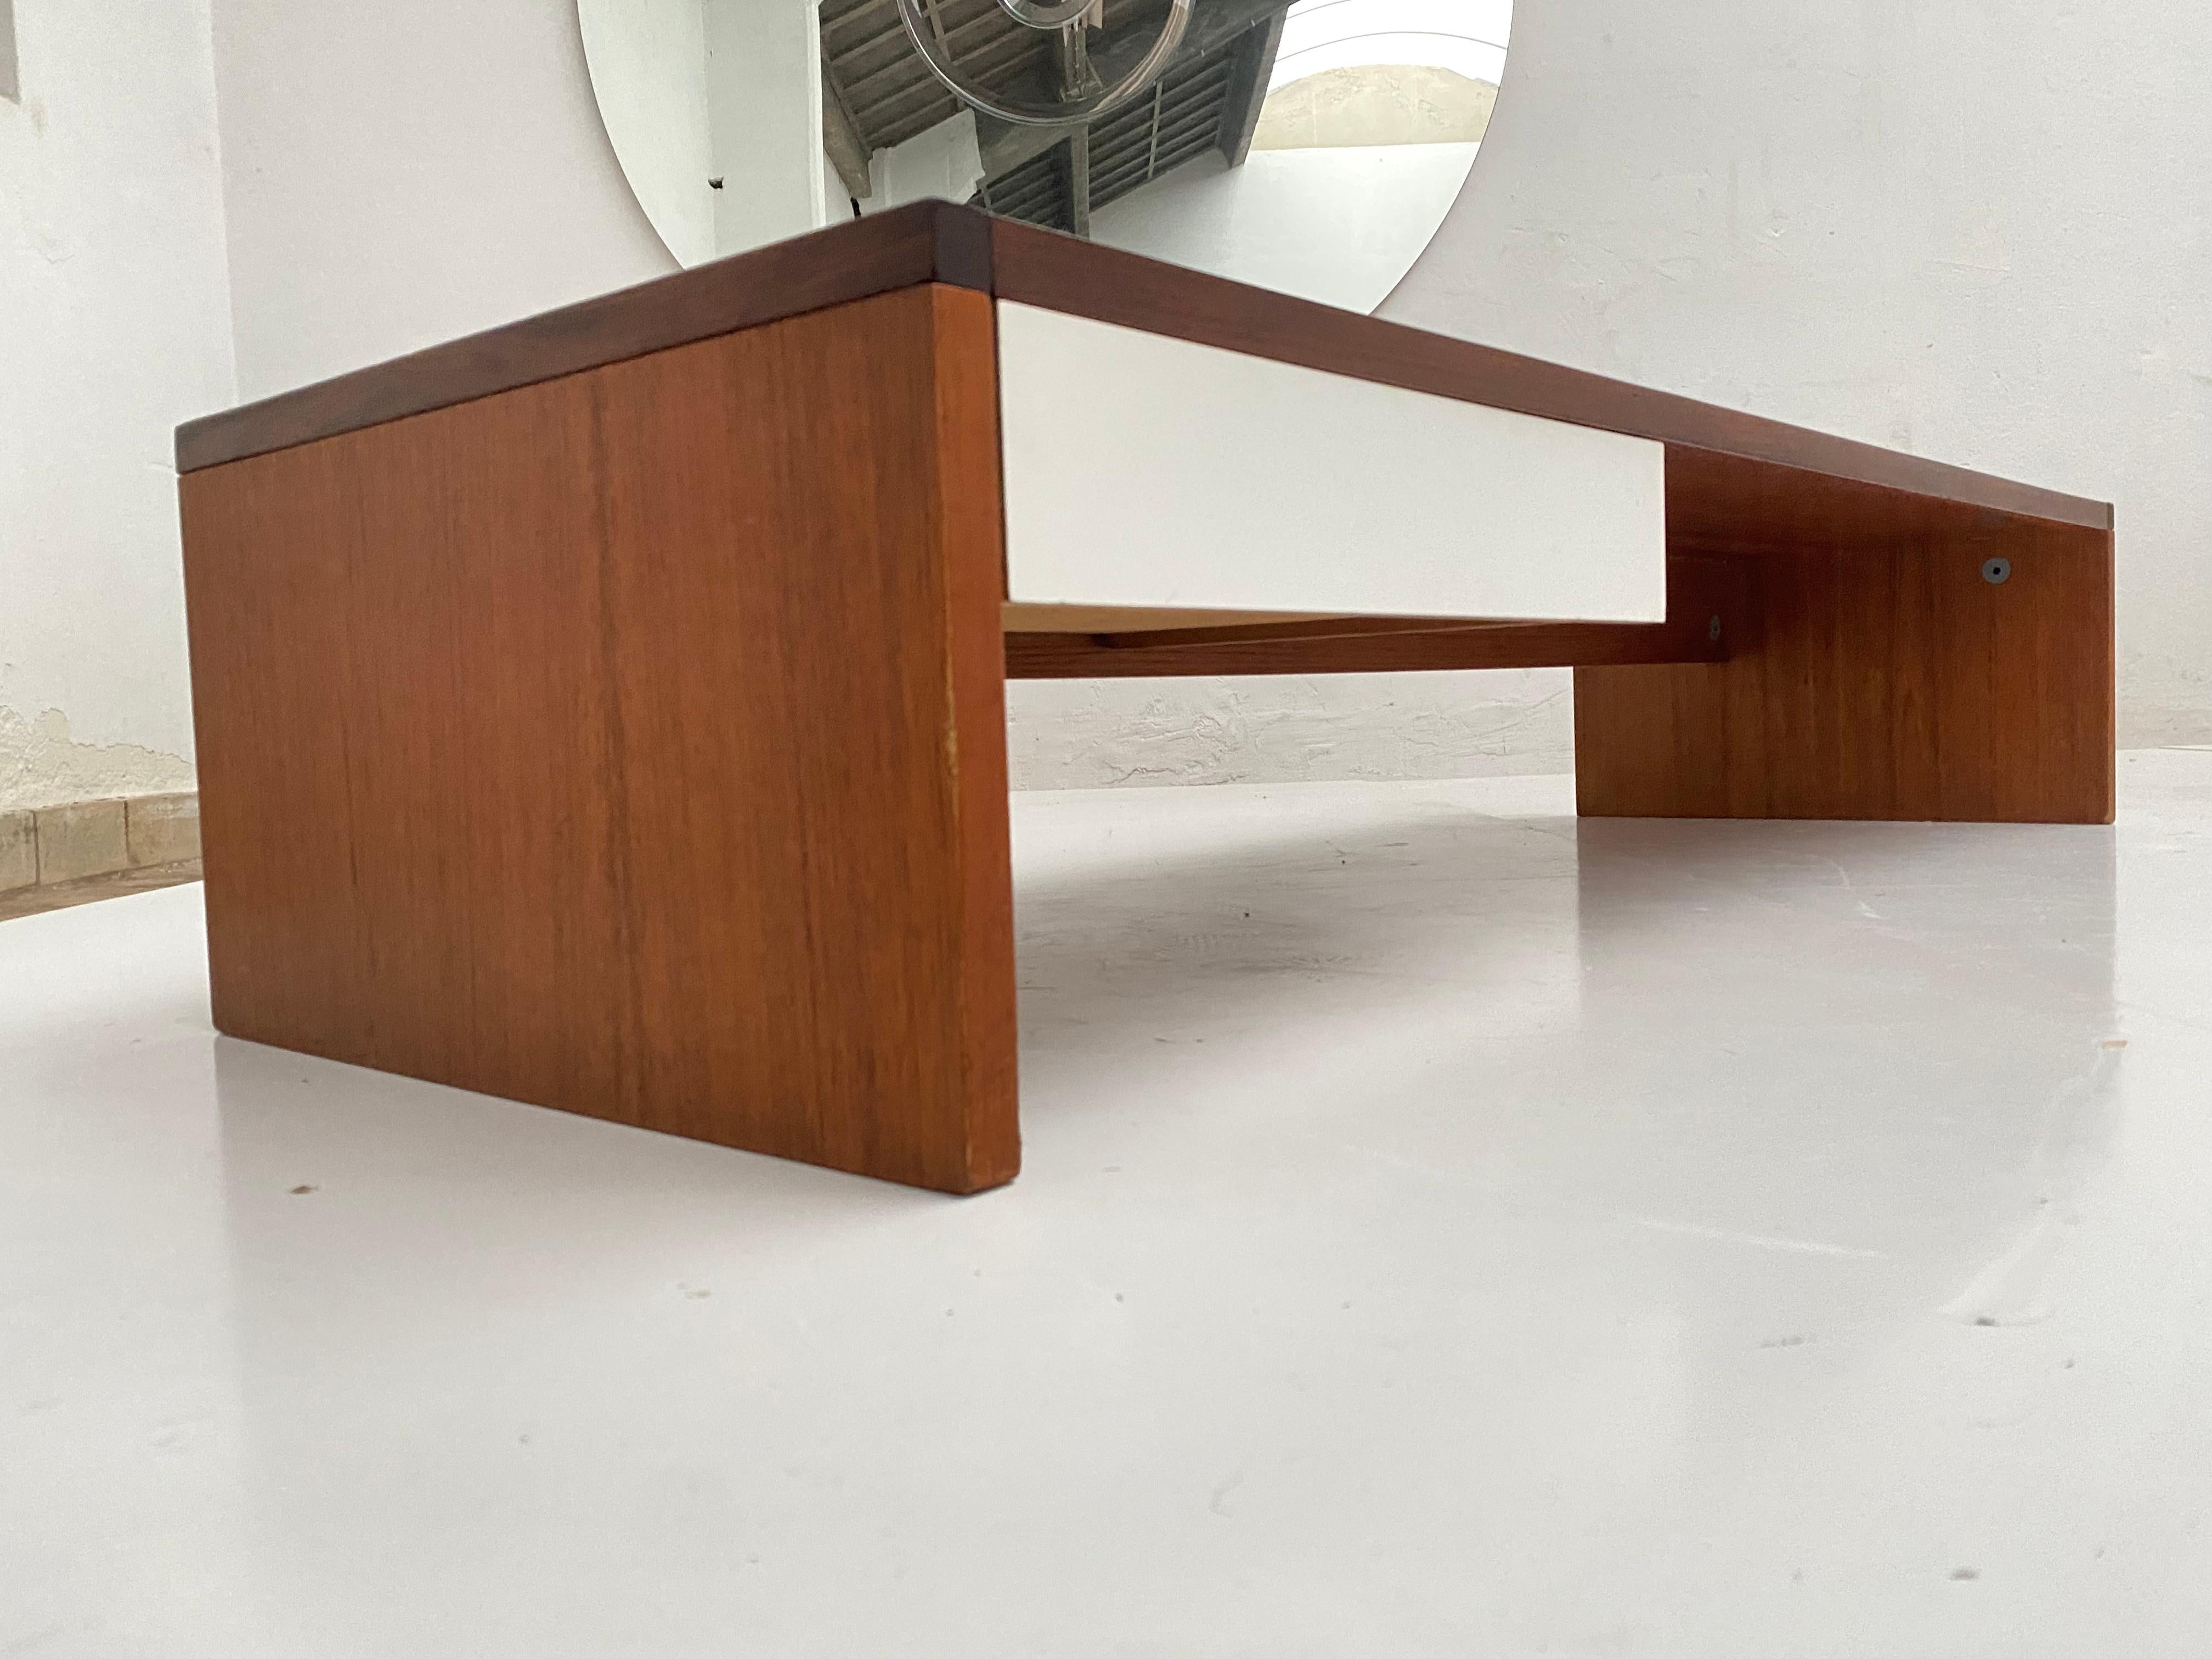 Pair of oversized Minimalist bedroom nightstands by Dutch designer Cees Braakman

Teakwood with white formica top and a drawer.

Pastoe furniture was always made and advertised as 